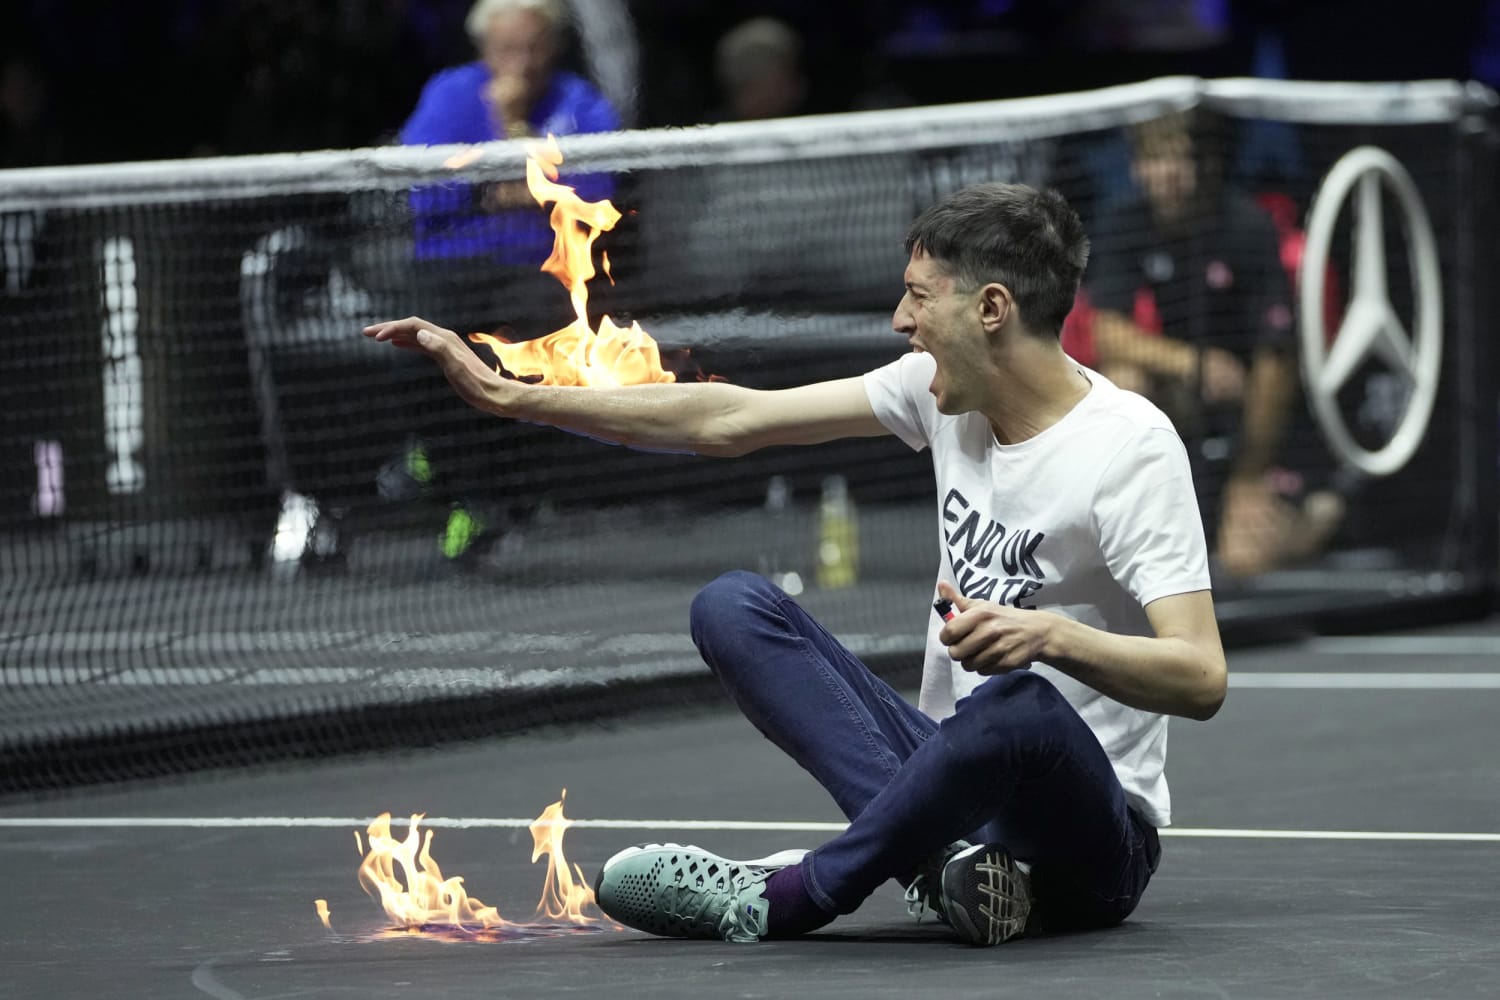 Man sets himself on fire on London tennis court where Roger Federer is set to play his last match